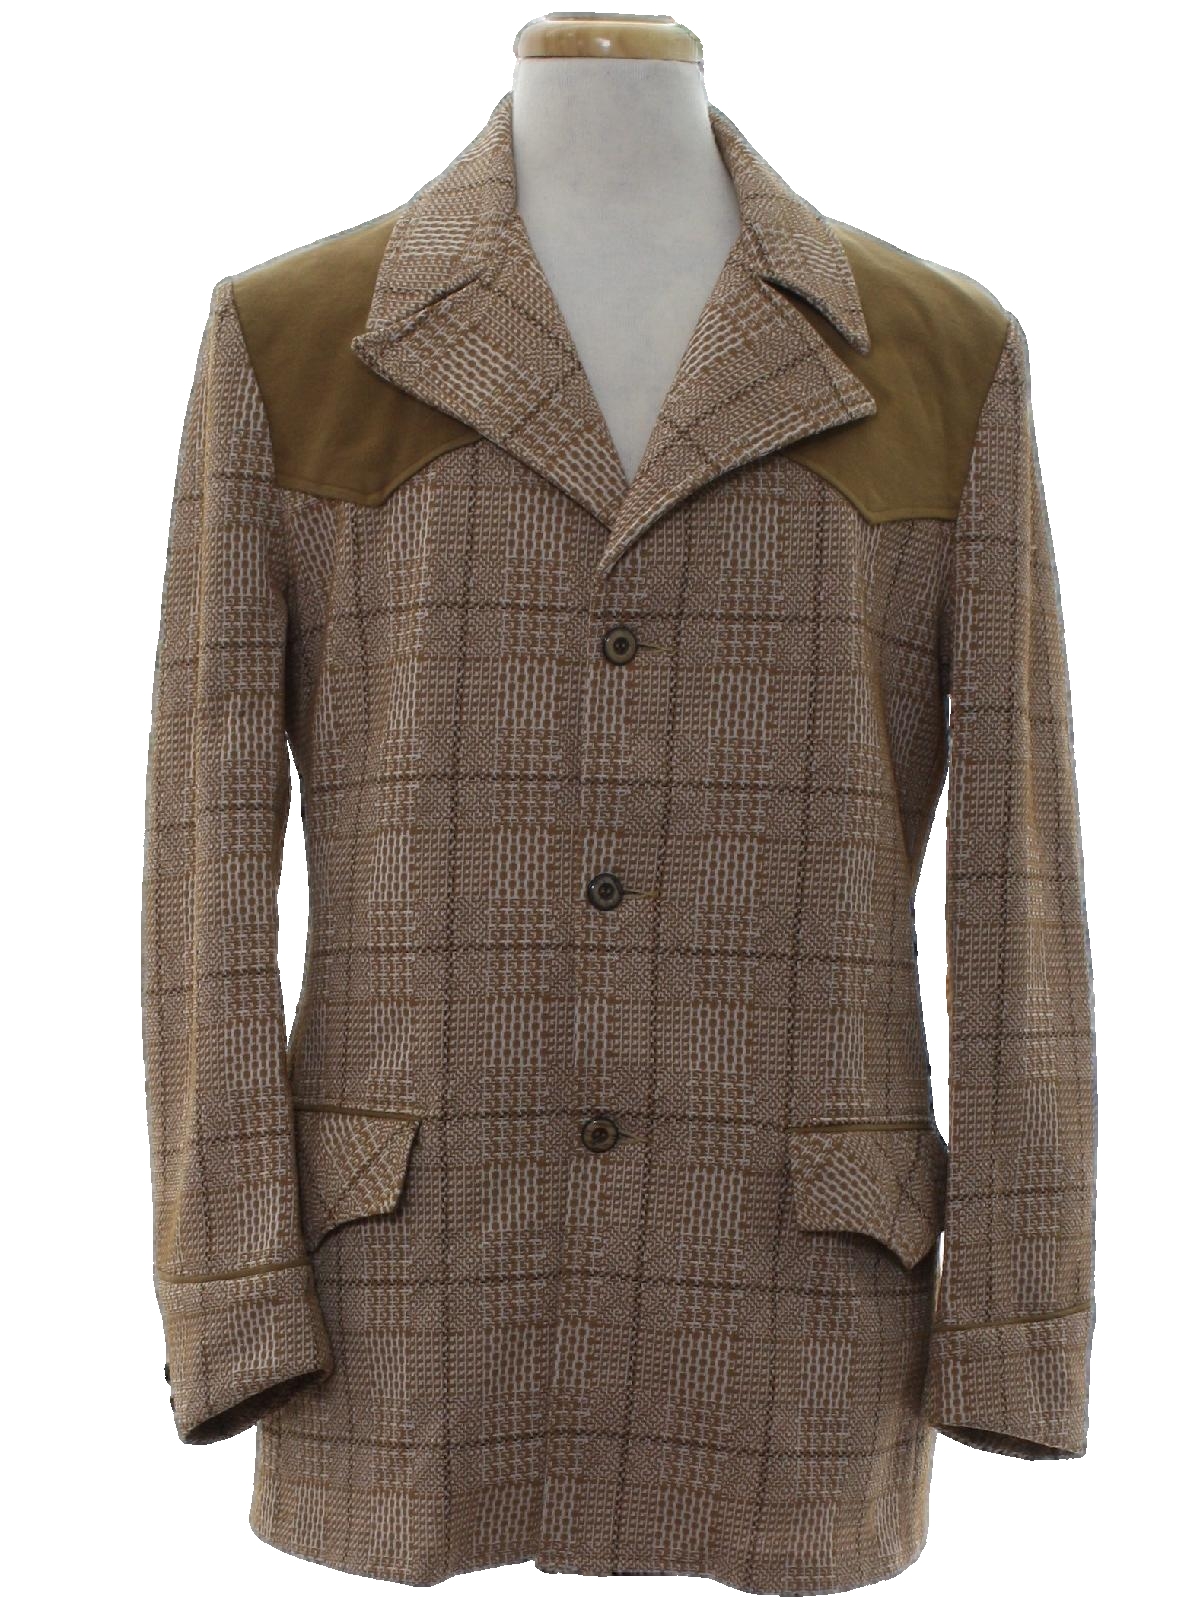 1970's Jacket (Trends): 70s -Trends- Mens white, tan and brown ...